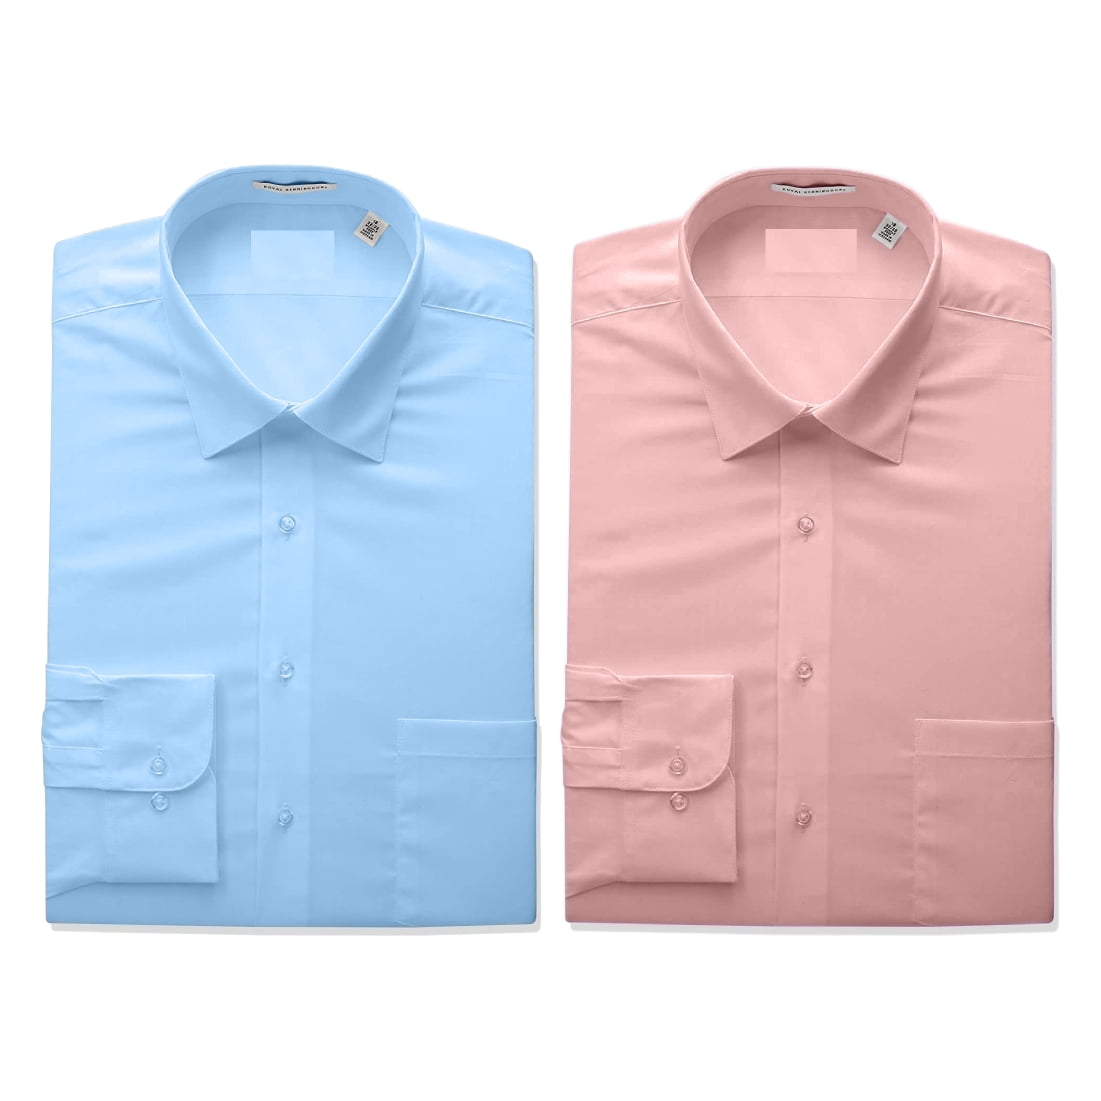 2 PACK Men's Boltini Italy Regular Fit Long Sleeve Classic Button